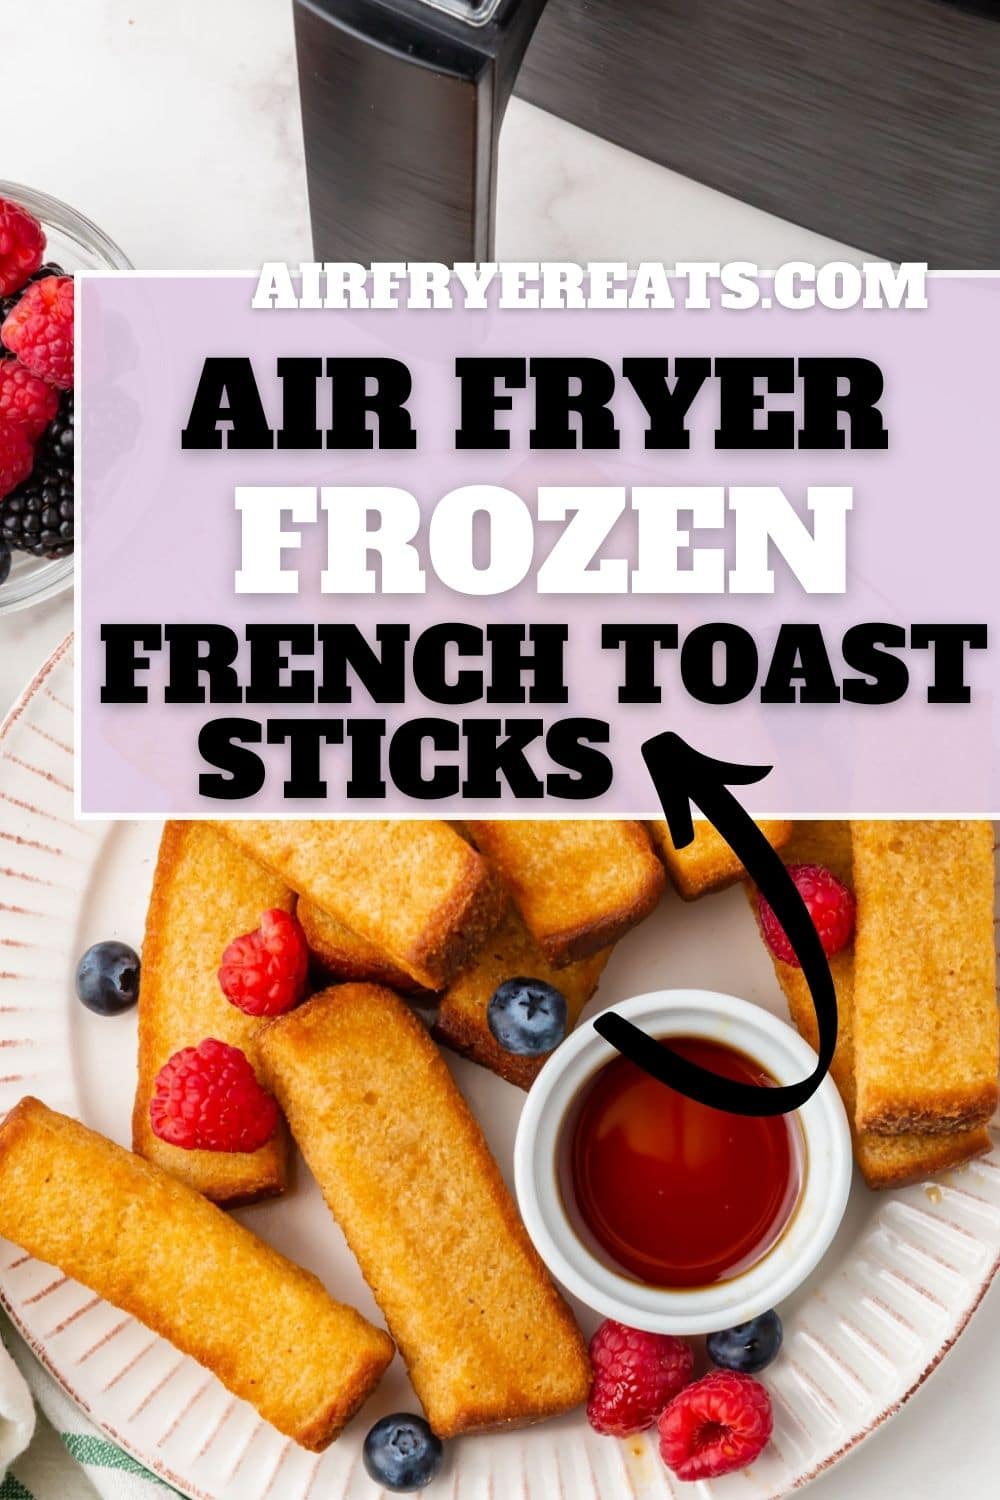 Love hot and fresh french toast sticks, with crispy edges? Make frozen french toast sticks in the air fryer to save time! via @vegetarianmamma